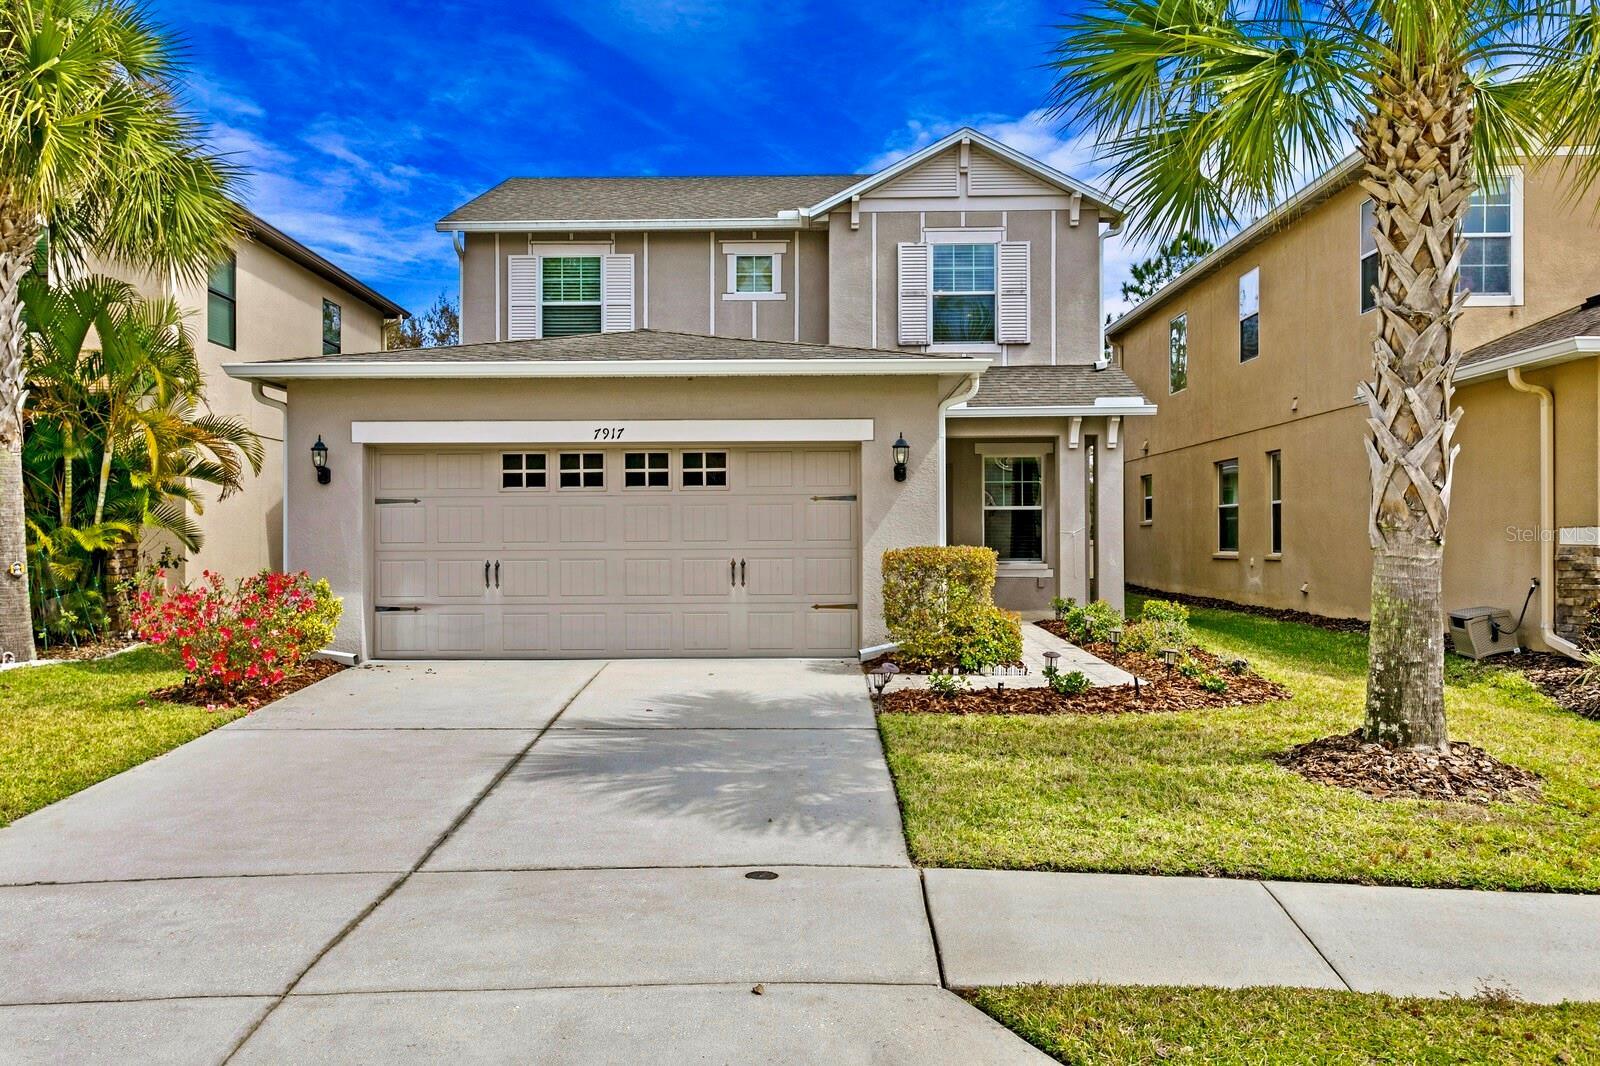 Photo one of 7917 Tuscany Woods Dr Tampa FL 33647 | MLS T3507647